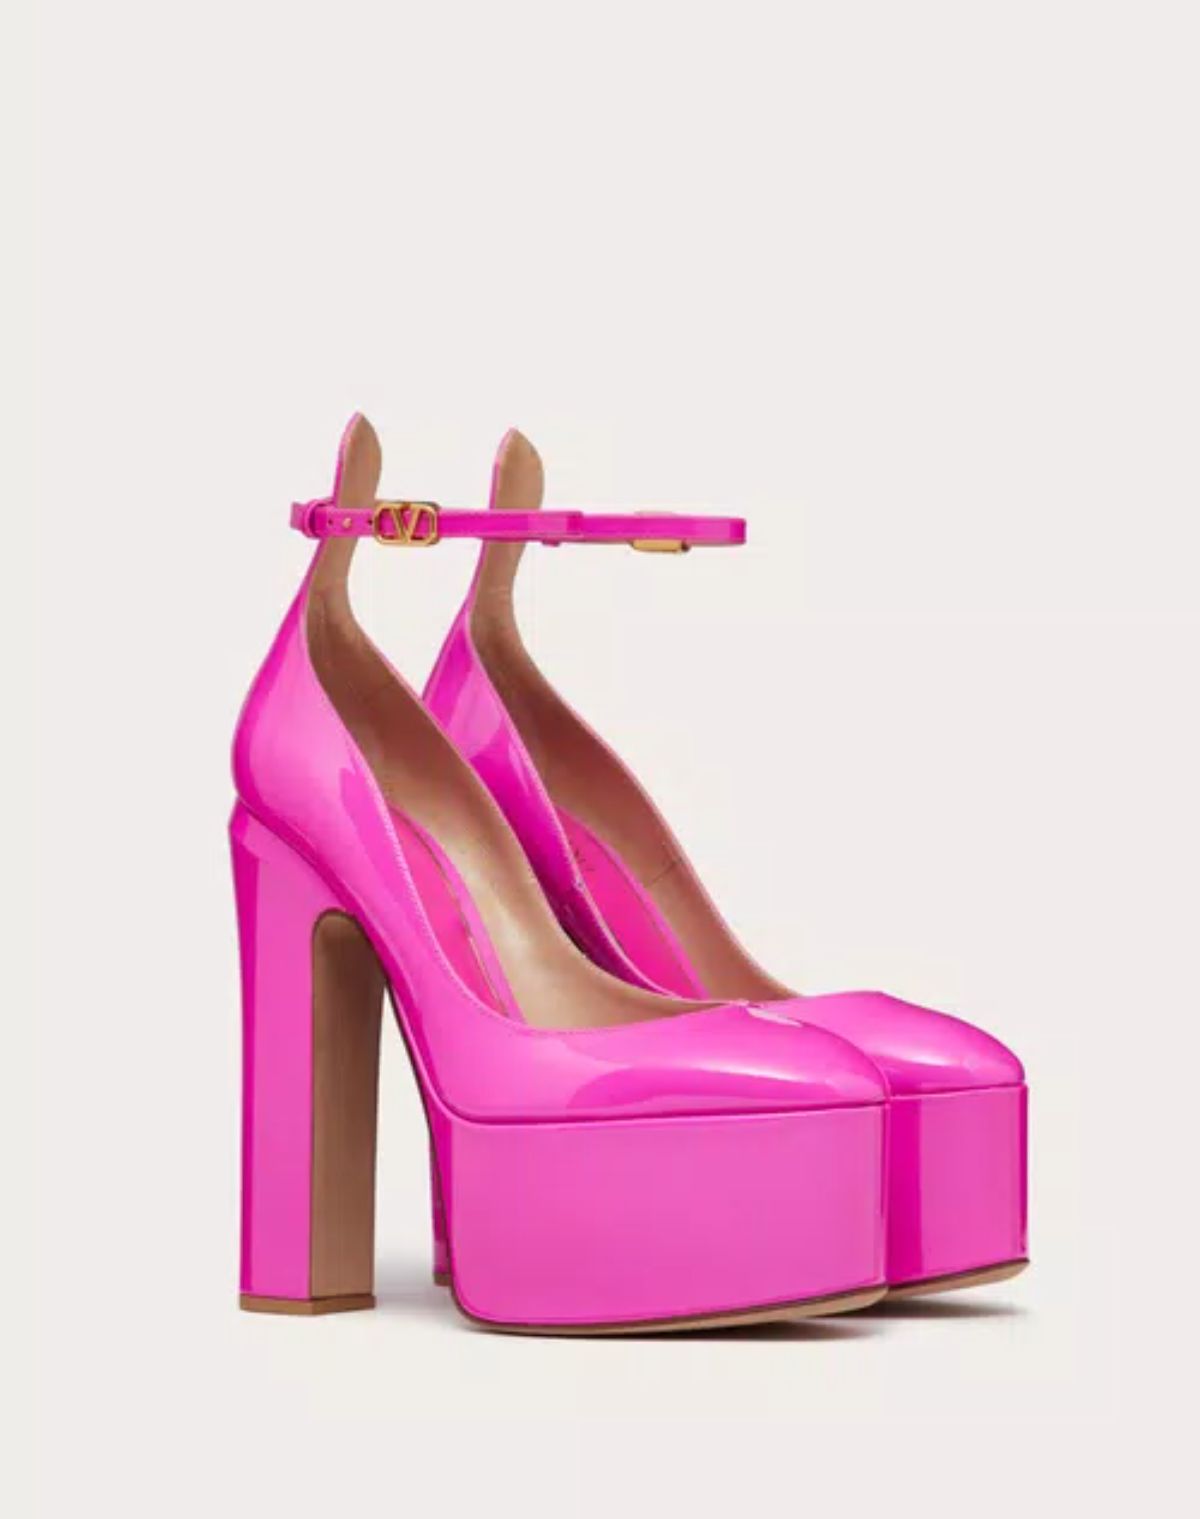 15 Chic Designer Platform Shoes to Shop Right Now | Preview.ph